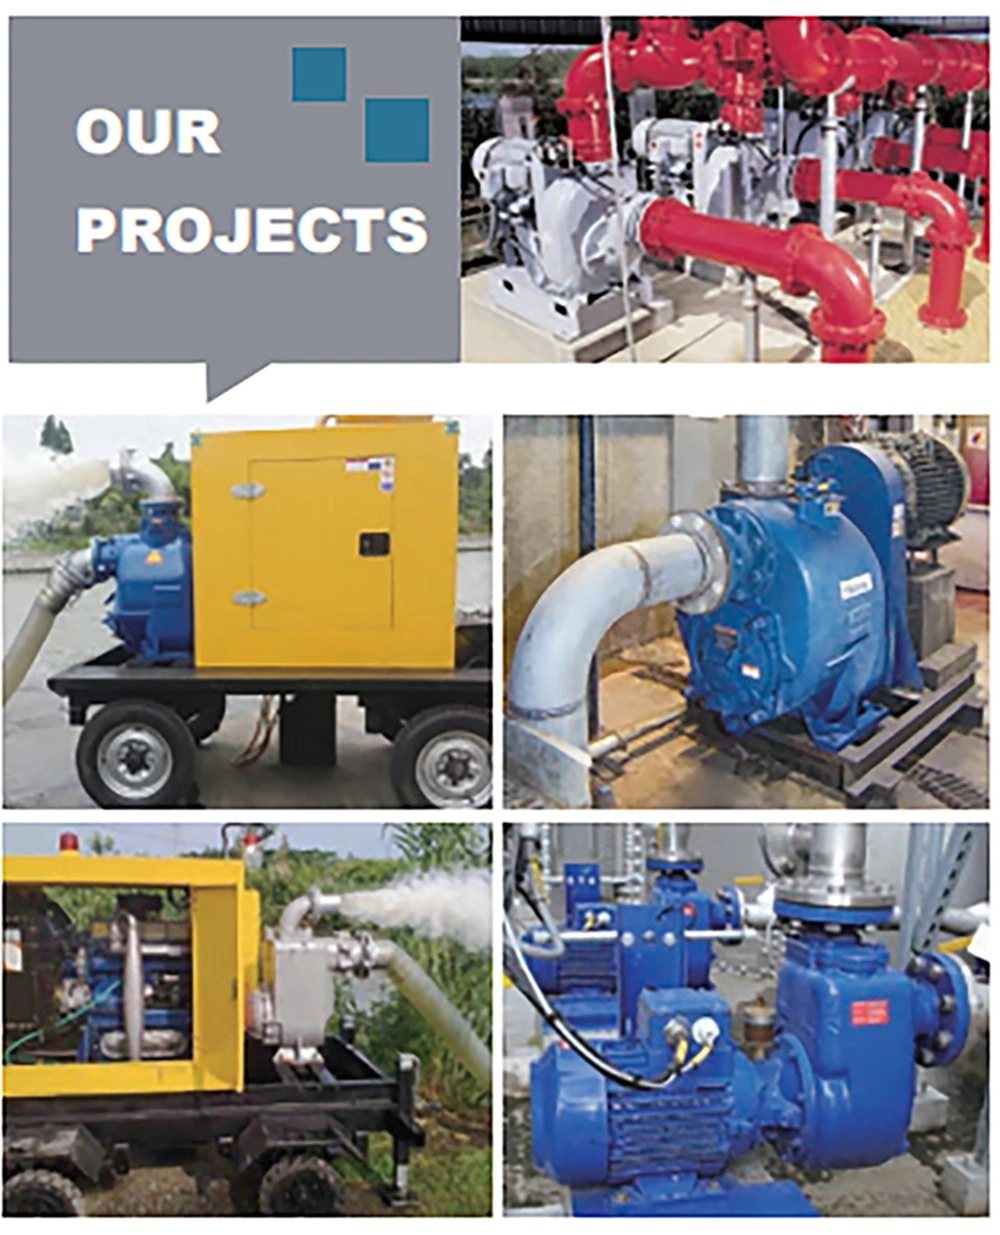 High Quality Self-Priming Centrifugal Water Pump for Wastewater Transport and Flood Control